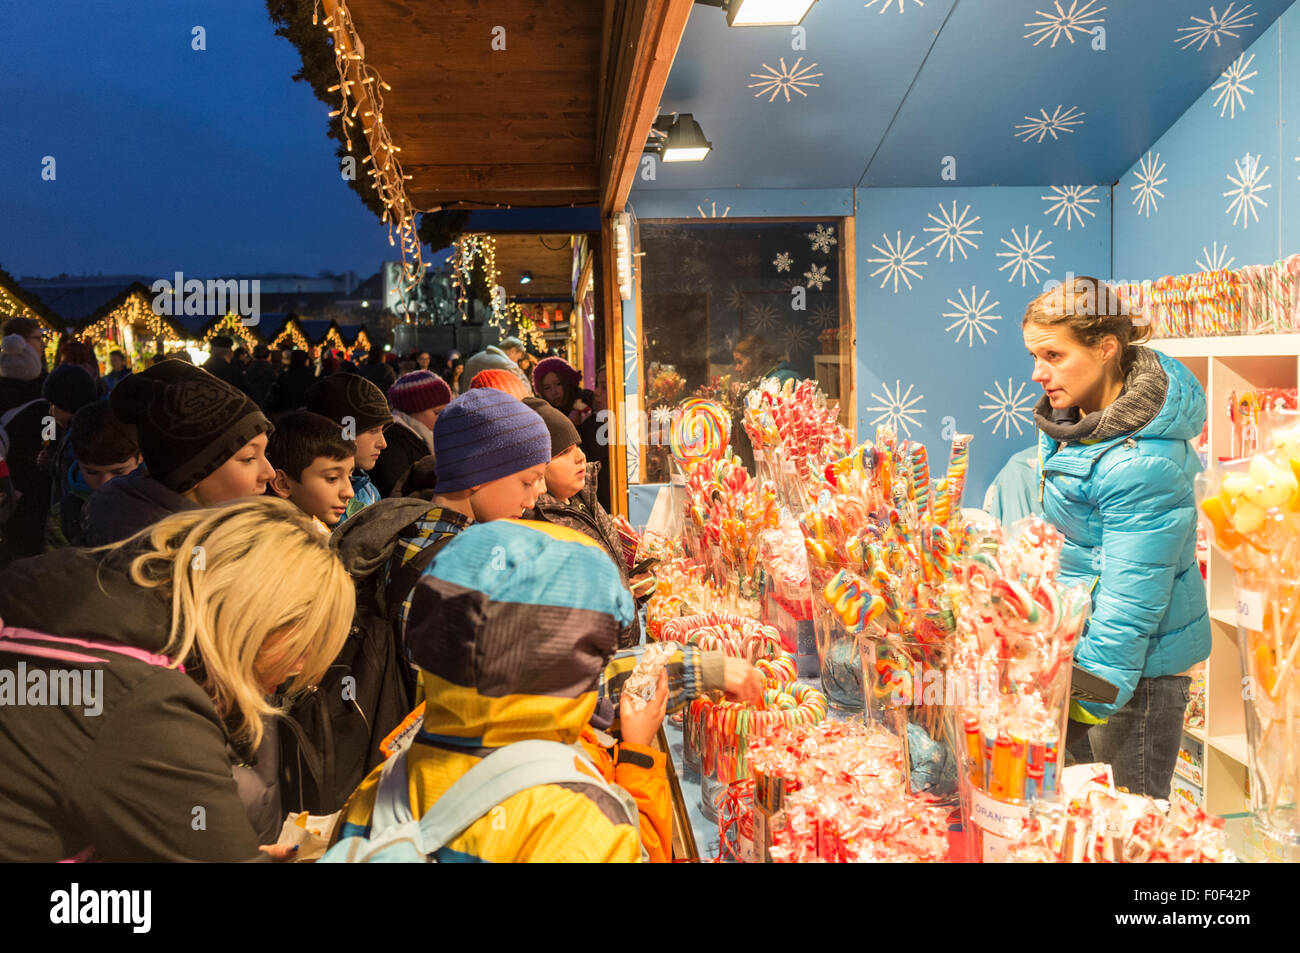 Children at a sweets stall at a Christmas market in Vienna, Austria Stock Photo